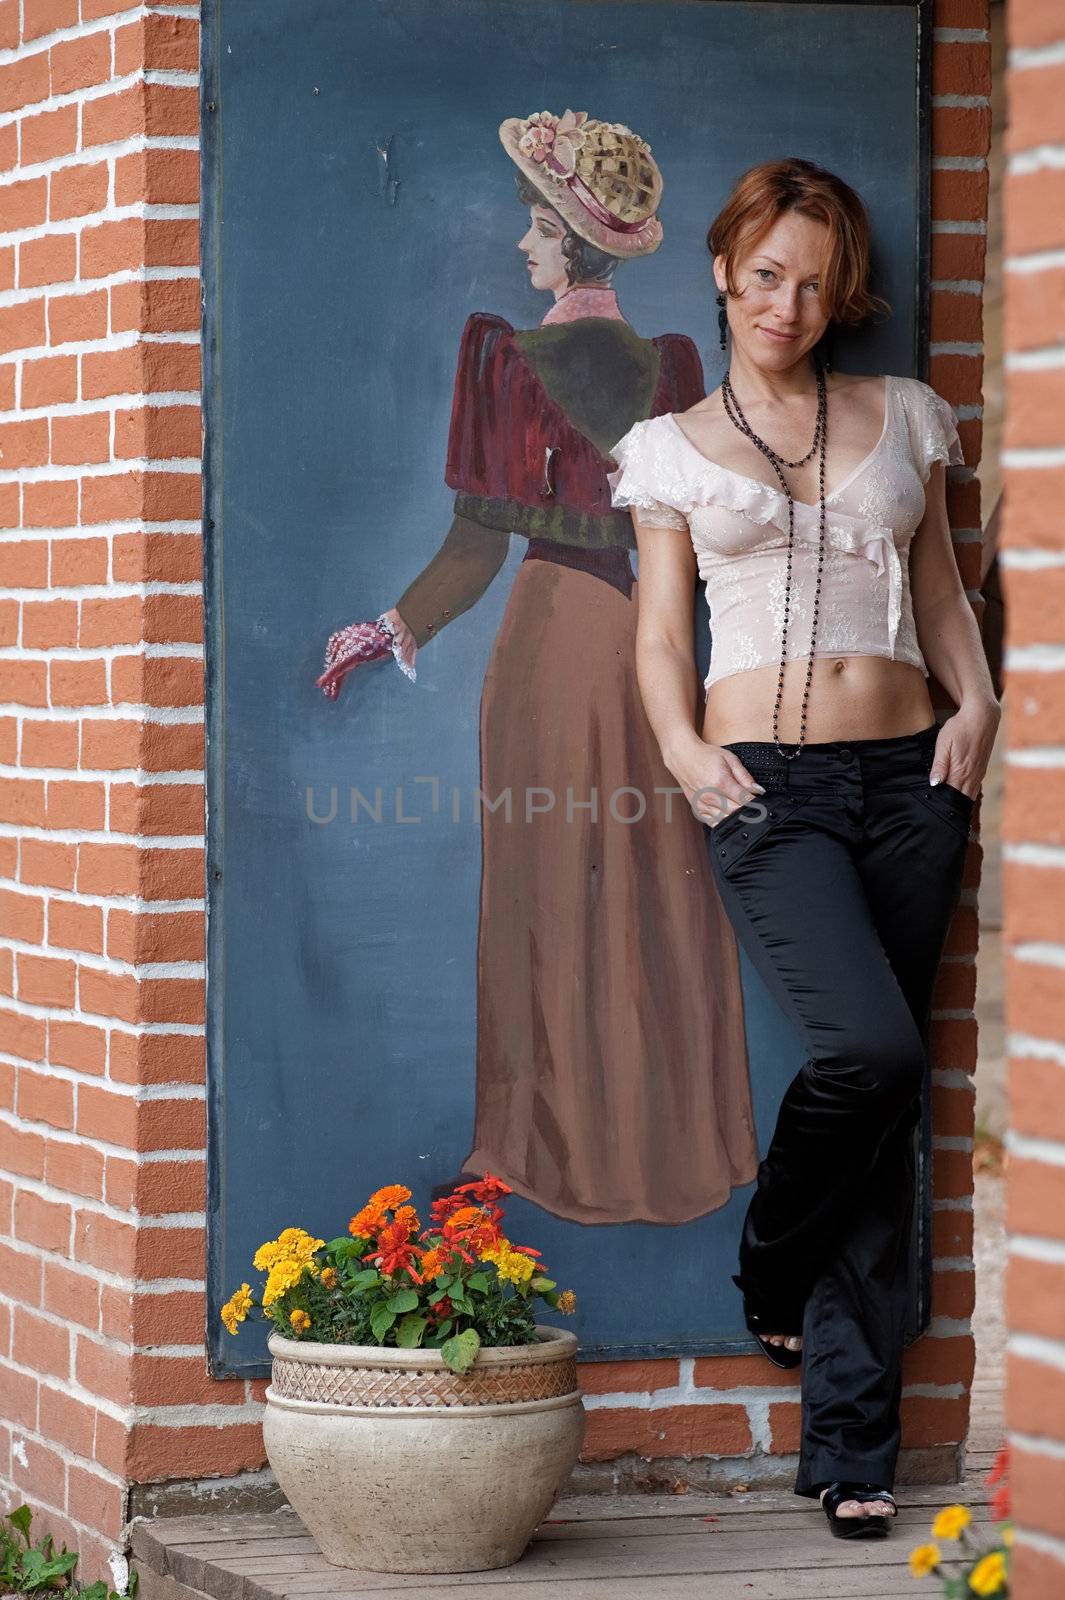 Adult women posing at the wall with retro picture